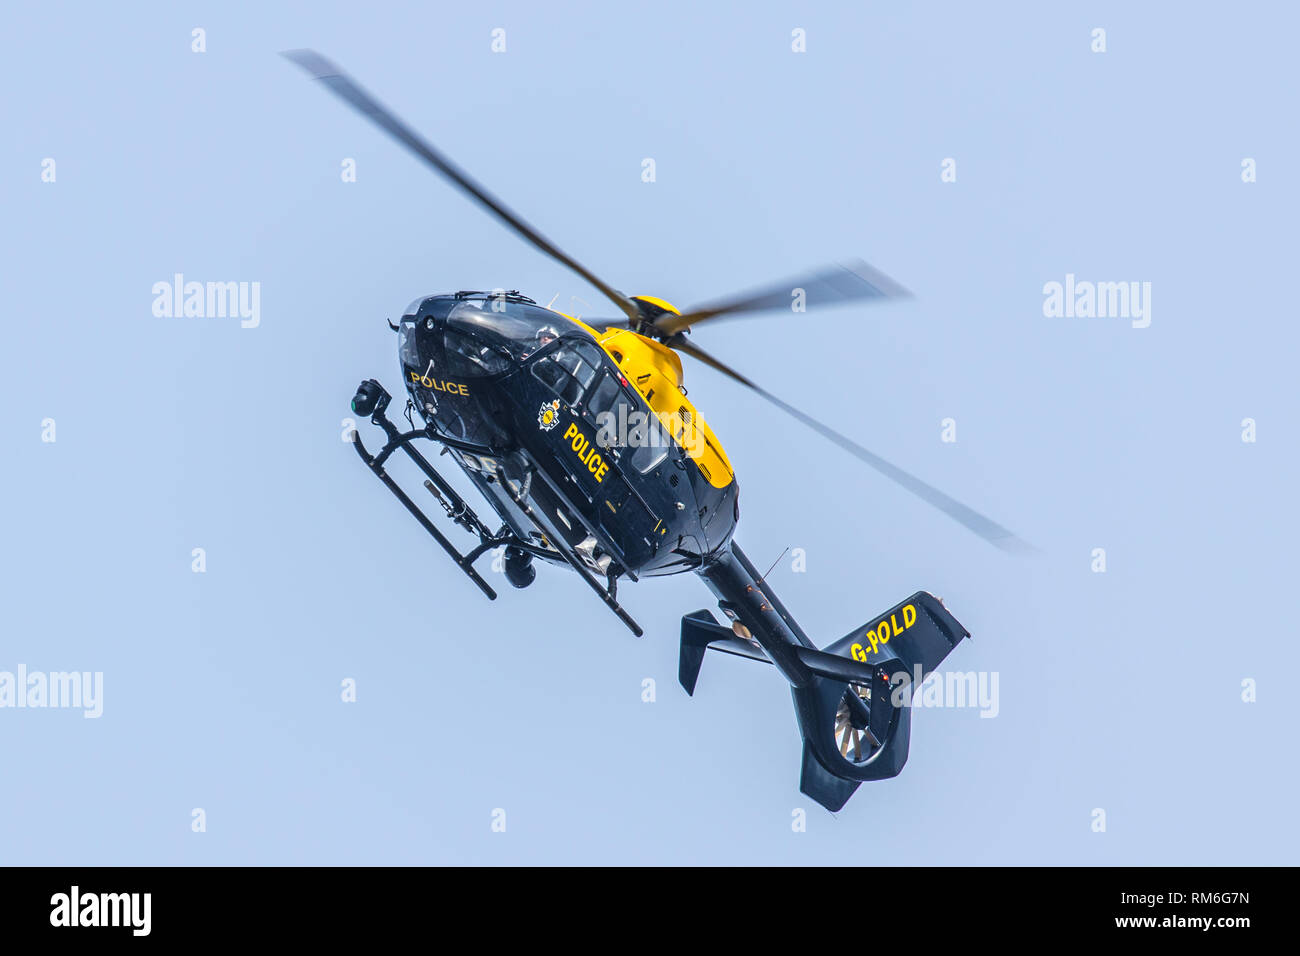 National Police Air Service Helicopter G-POLD searching above Armley in Leeds. Stock Photo